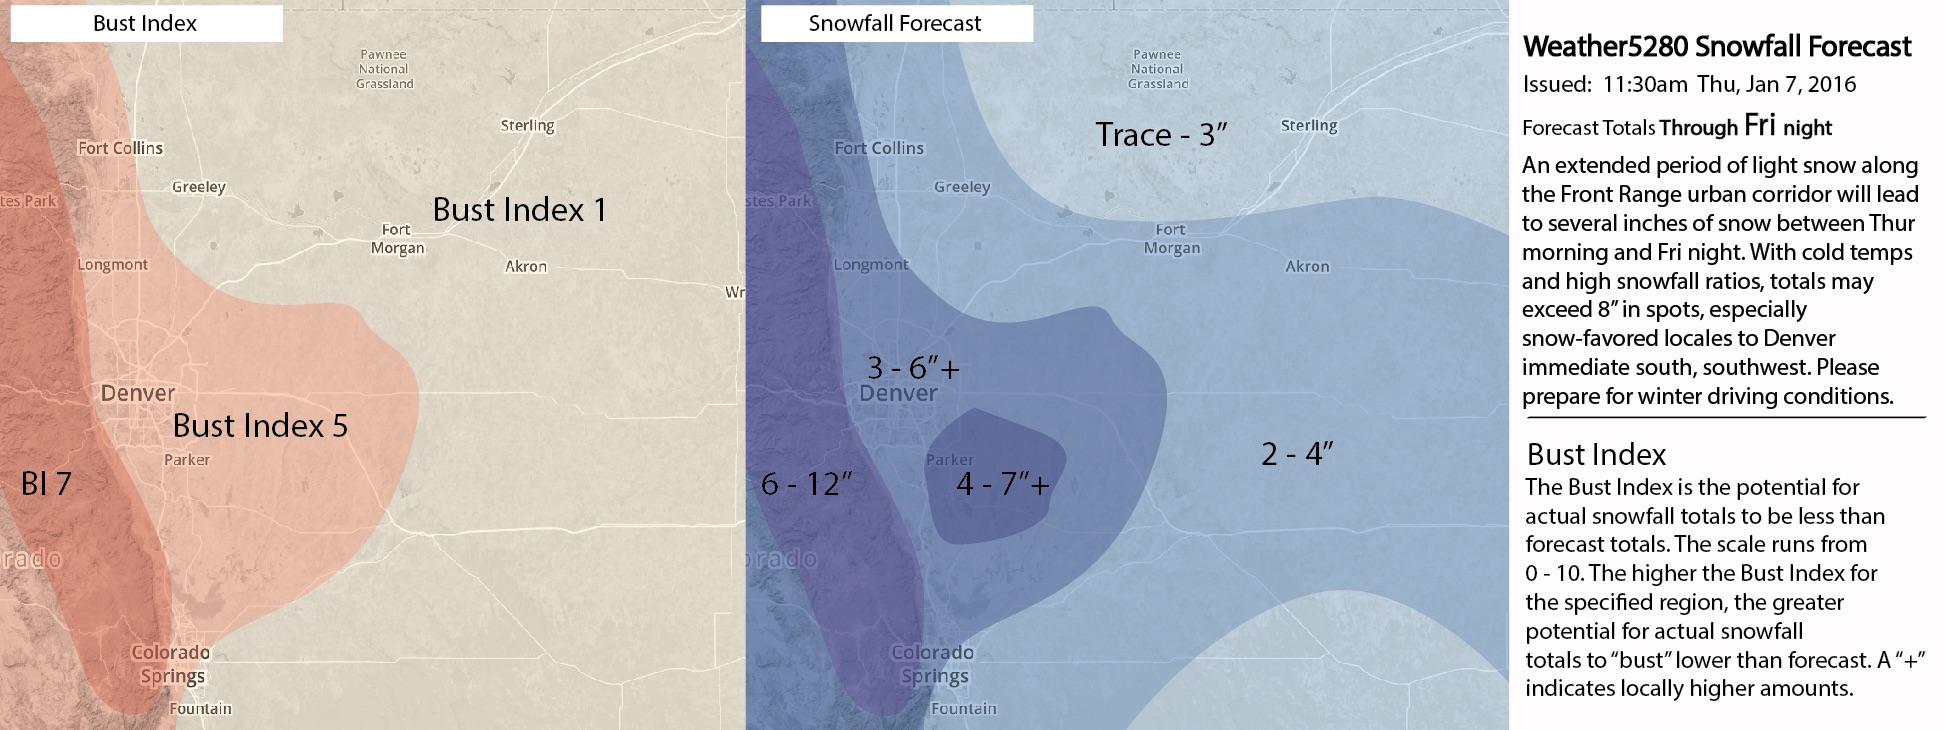 Updated Weather5280 Snowfall Forecast | includes any snow that has already fallen